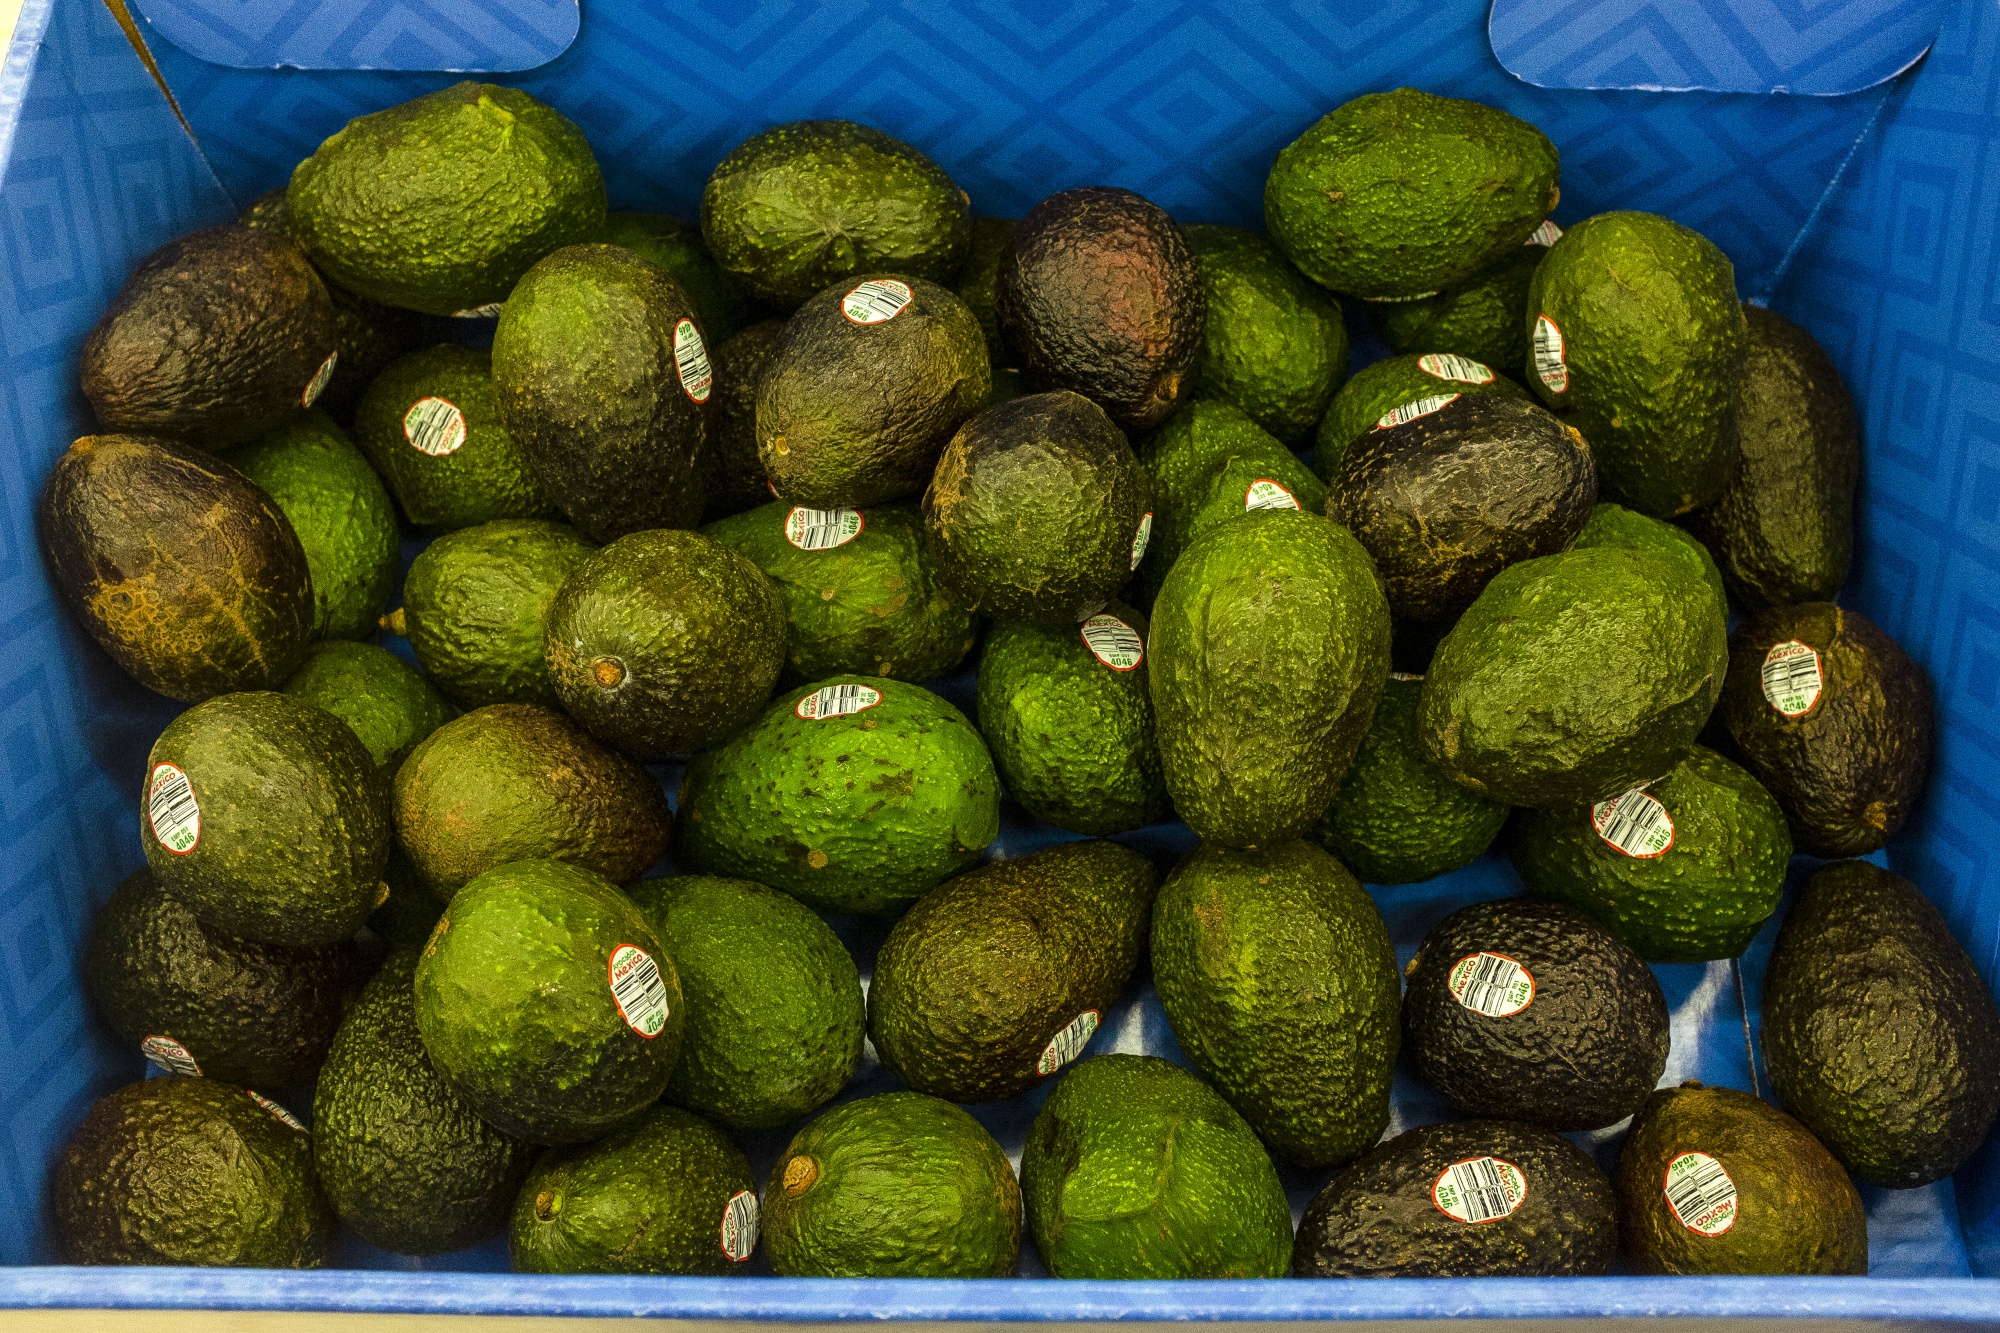 Avocados contain dietary fibre, healthy monounsaturated fats and other key vitamins and minerals.